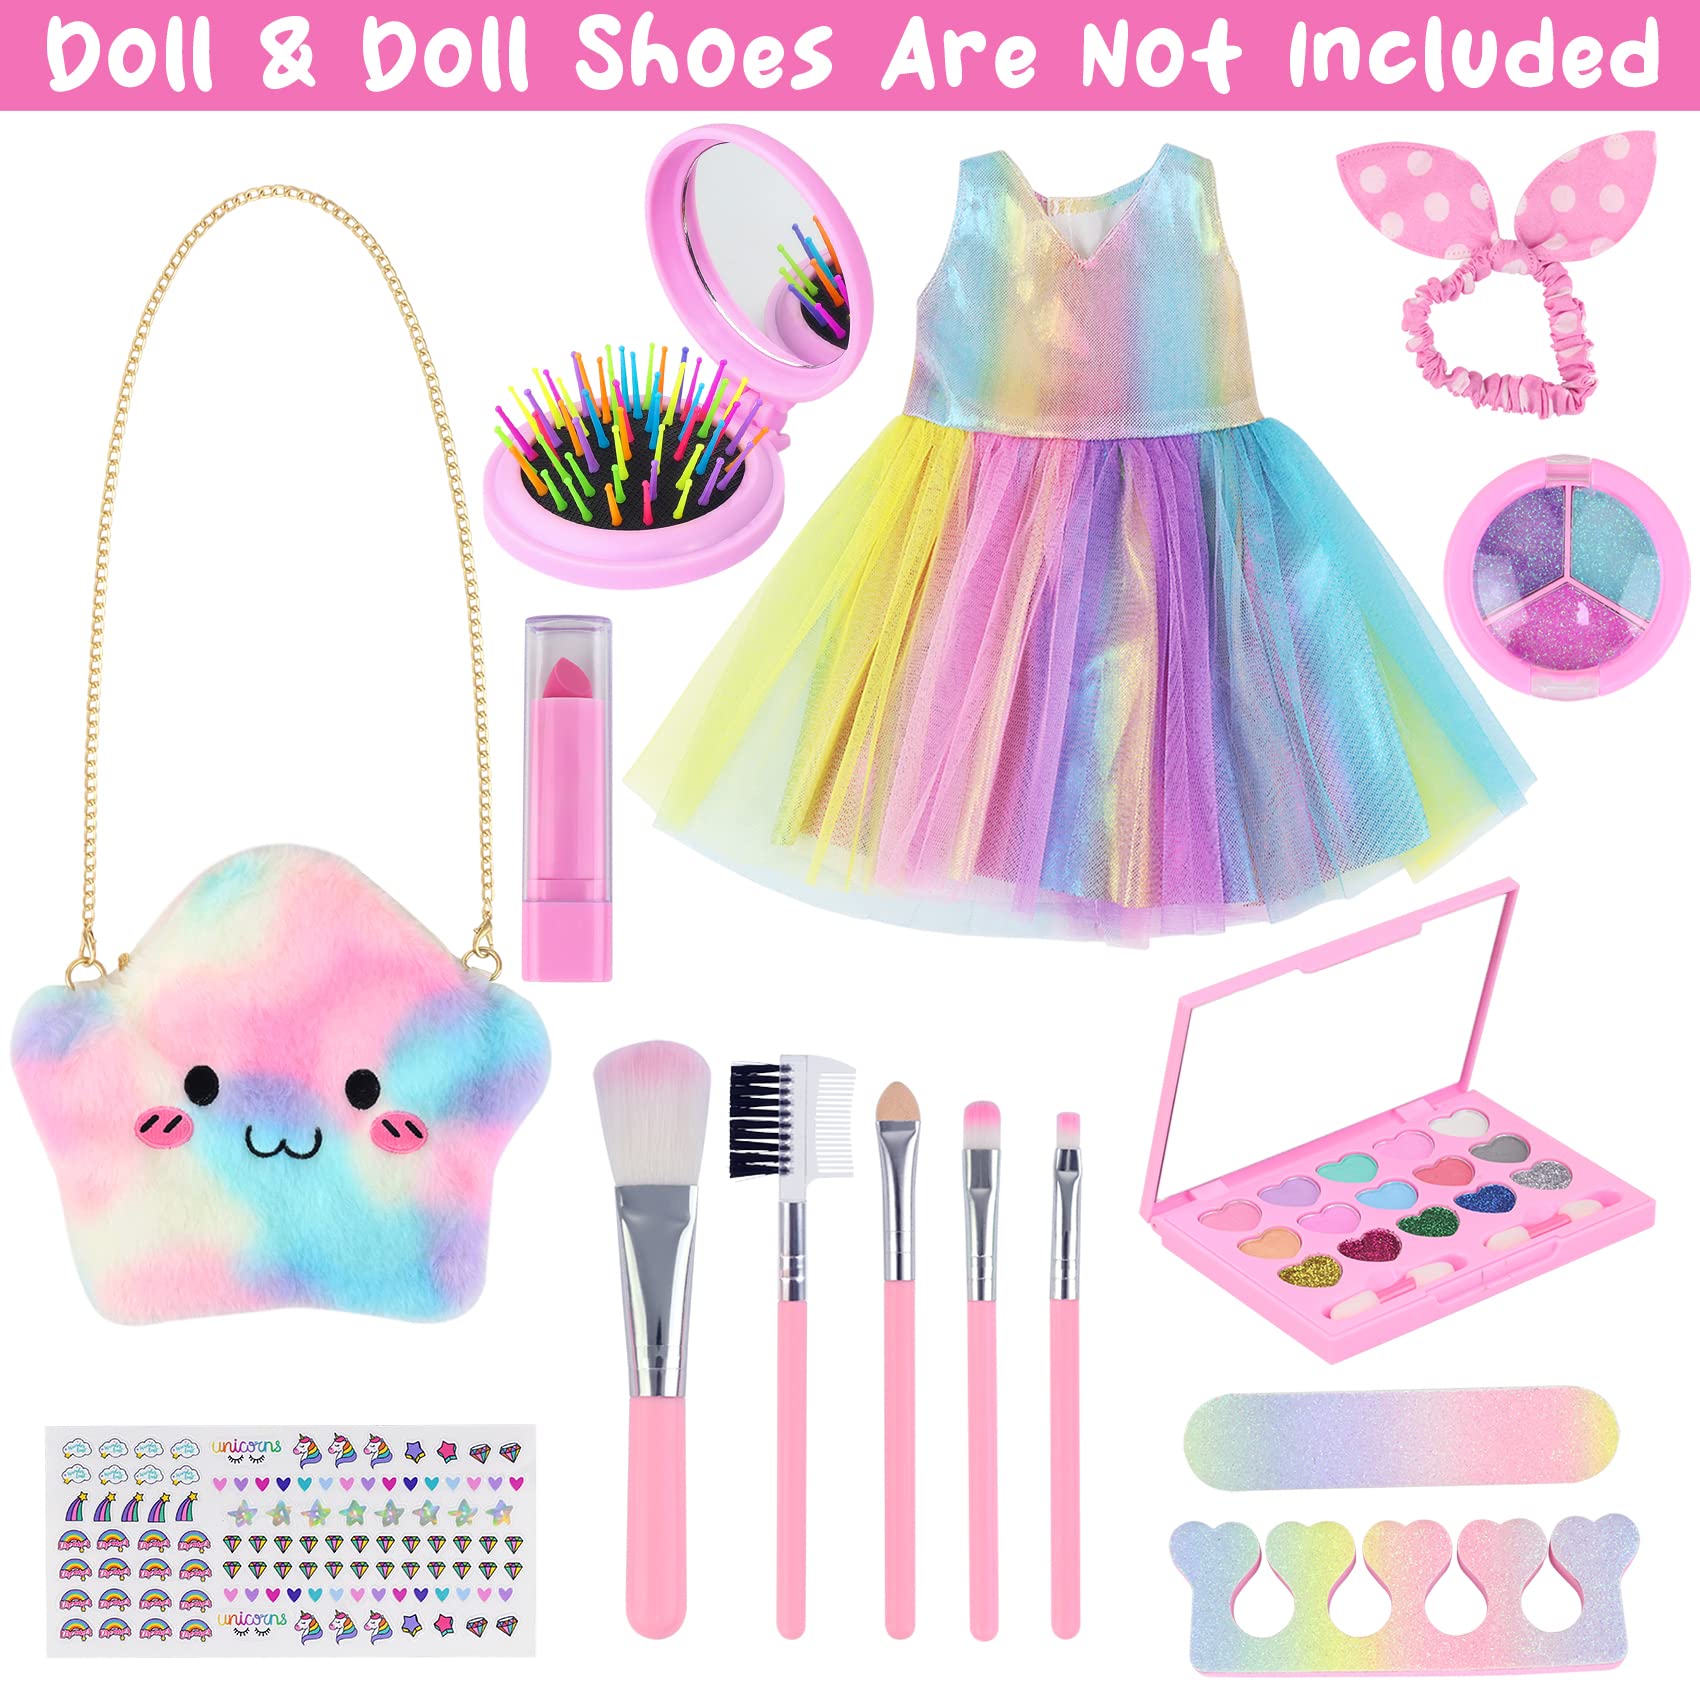 UNICORN ELEMENT 15 Pcs 18 Inch Doll Accessories - Dress with Makeup Set for Generation Dolls - Clothes and Accessories (Doll Not Included)